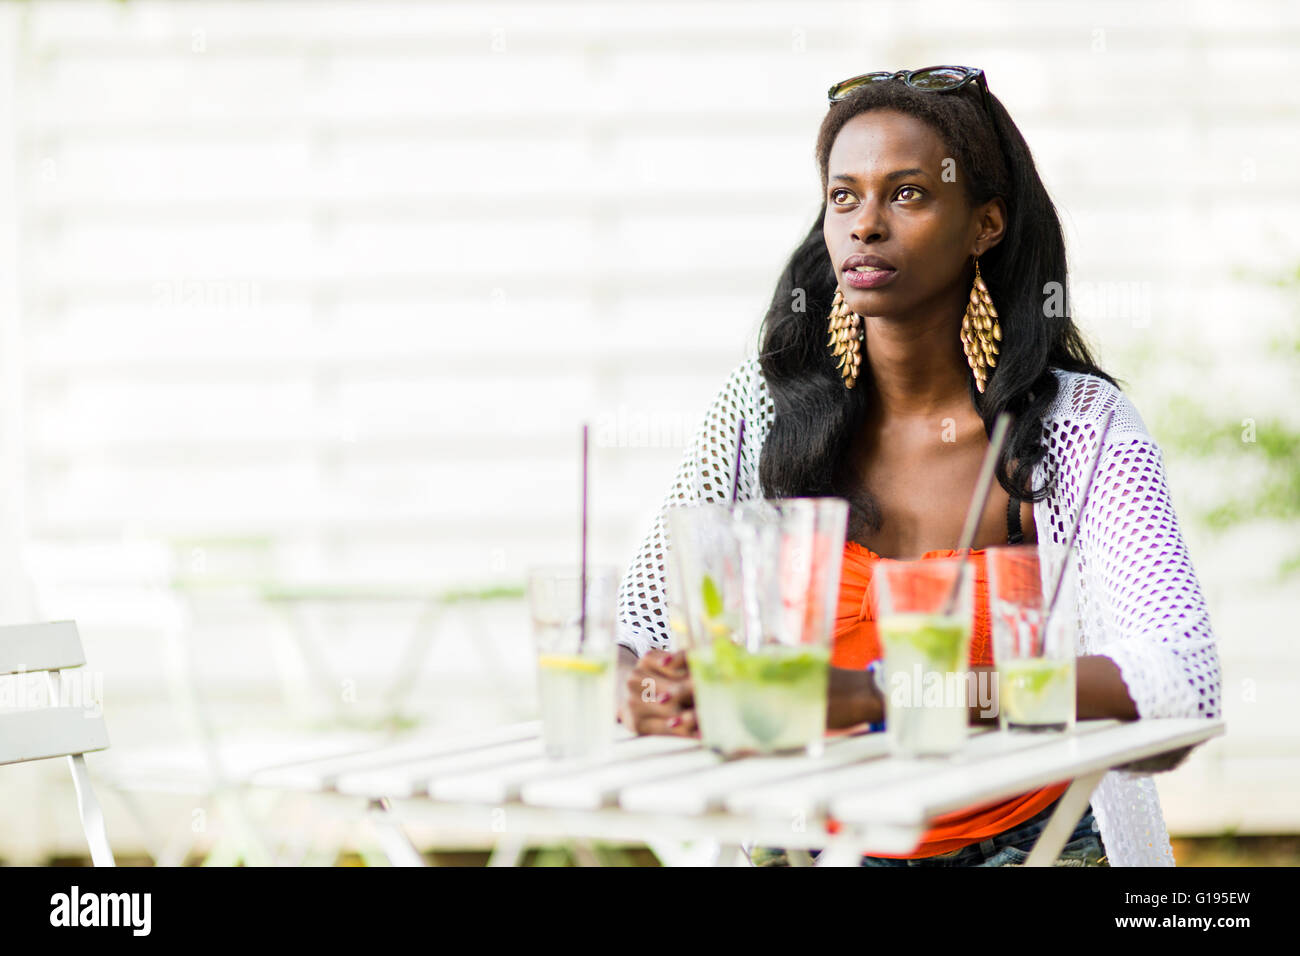 Beautiful woman is sitting at a table alone and waiting for friends Stock Photo